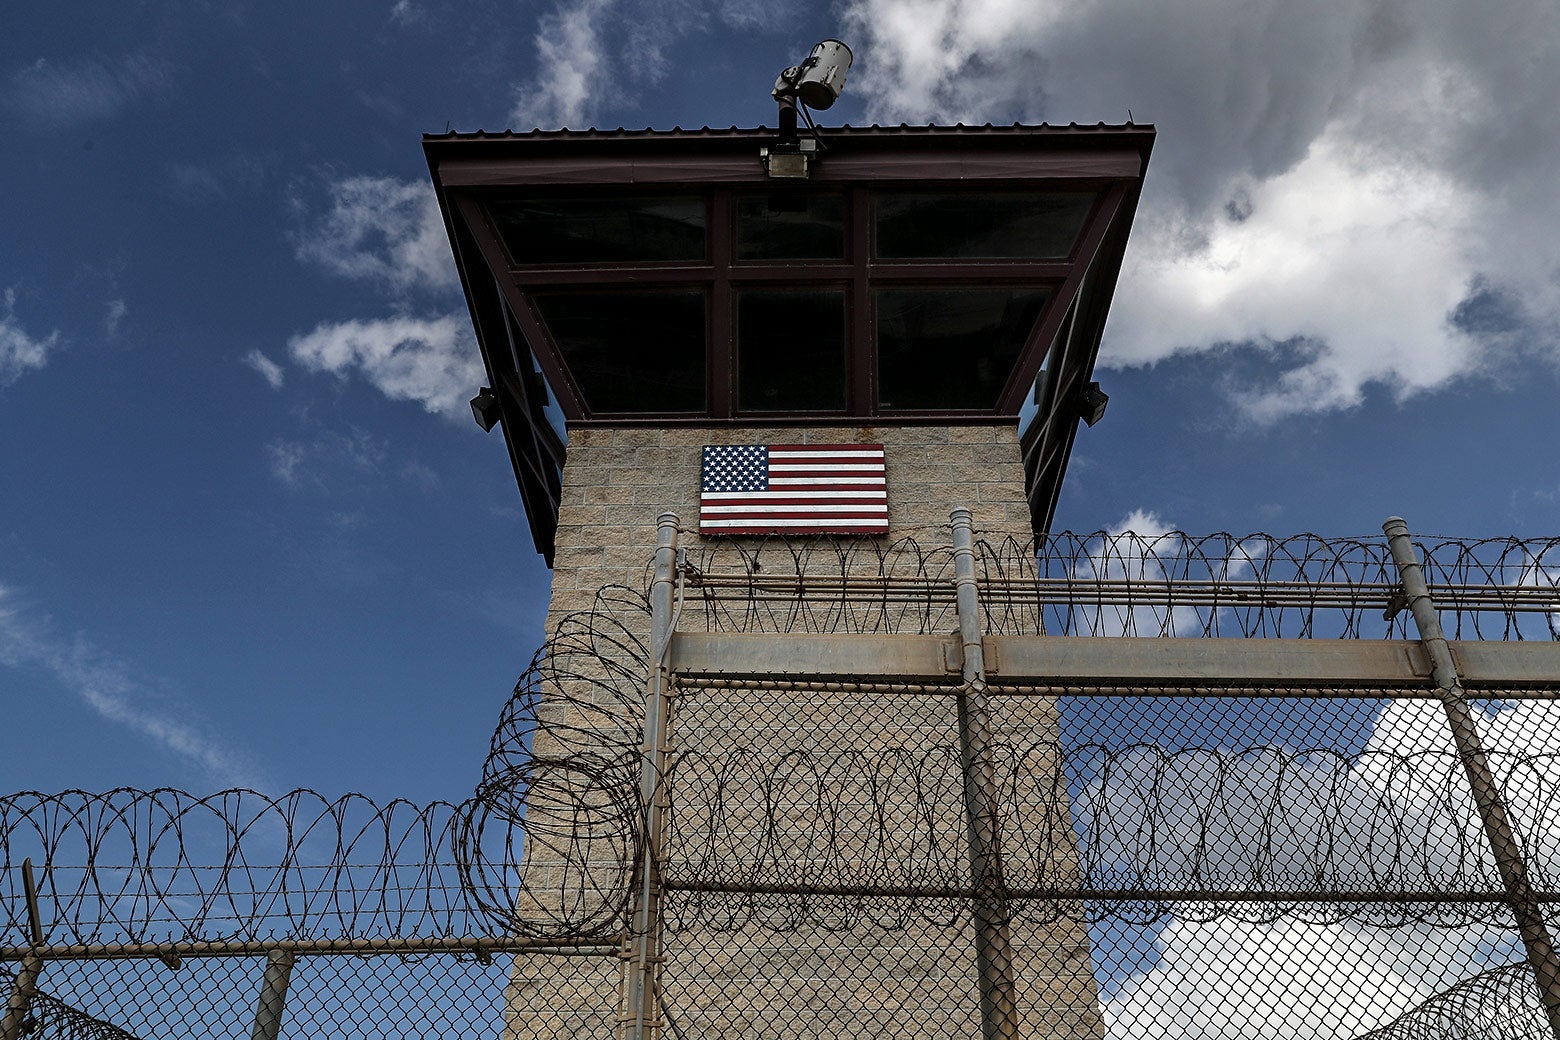 A guard tower marked with an American flag, surrounded by barbed wire